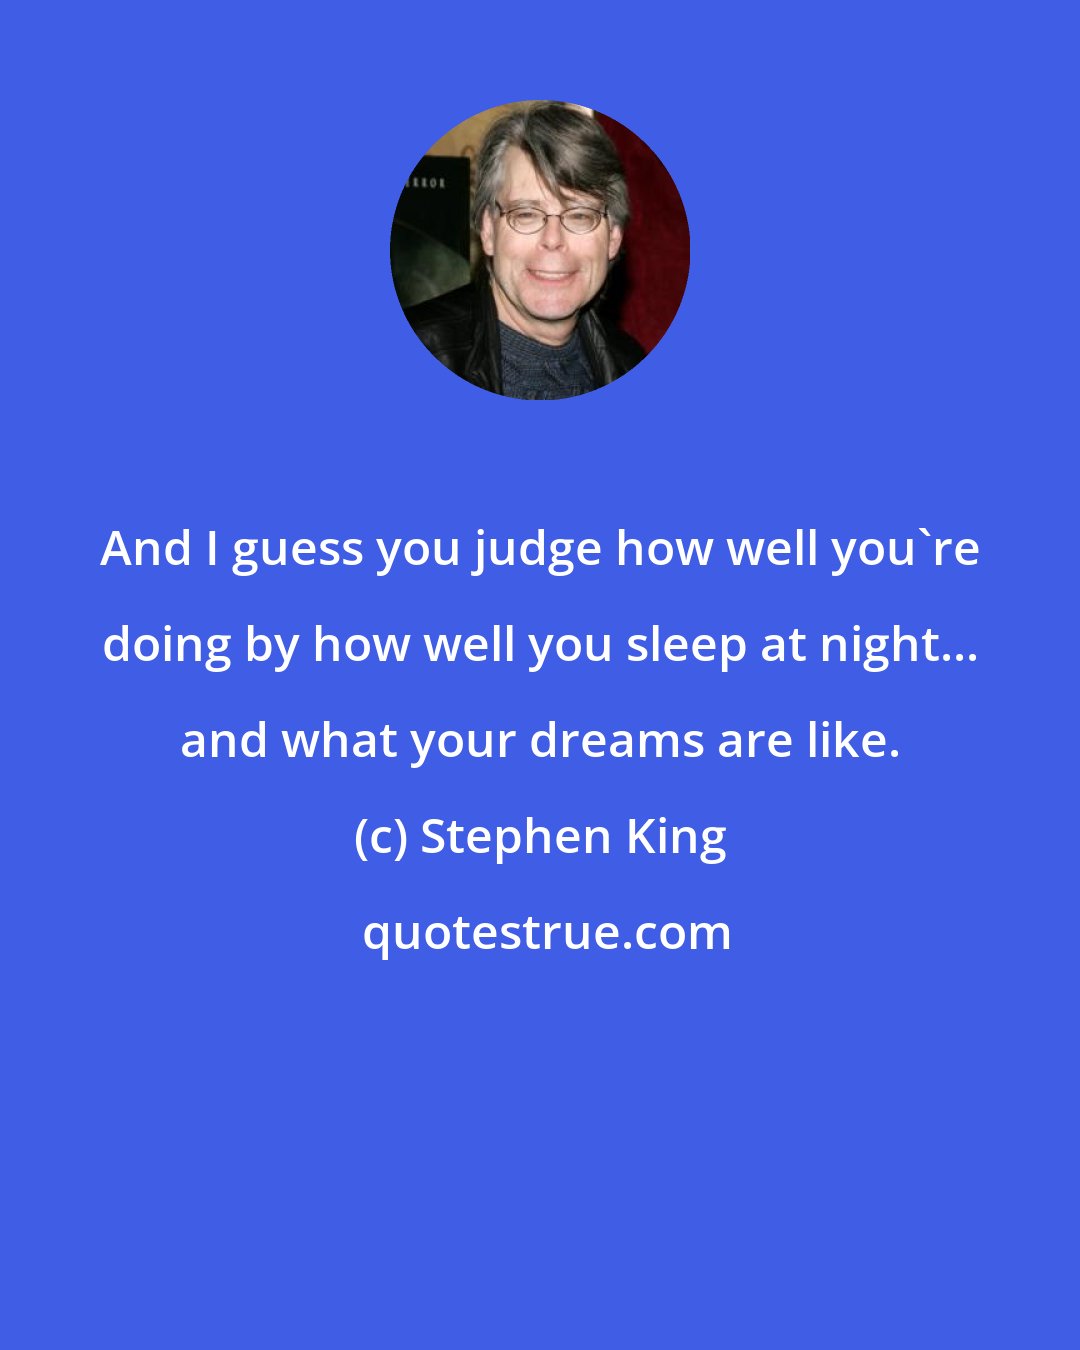 Stephen King: And I guess you judge how well you're doing by how well you sleep at night... and what your dreams are like.